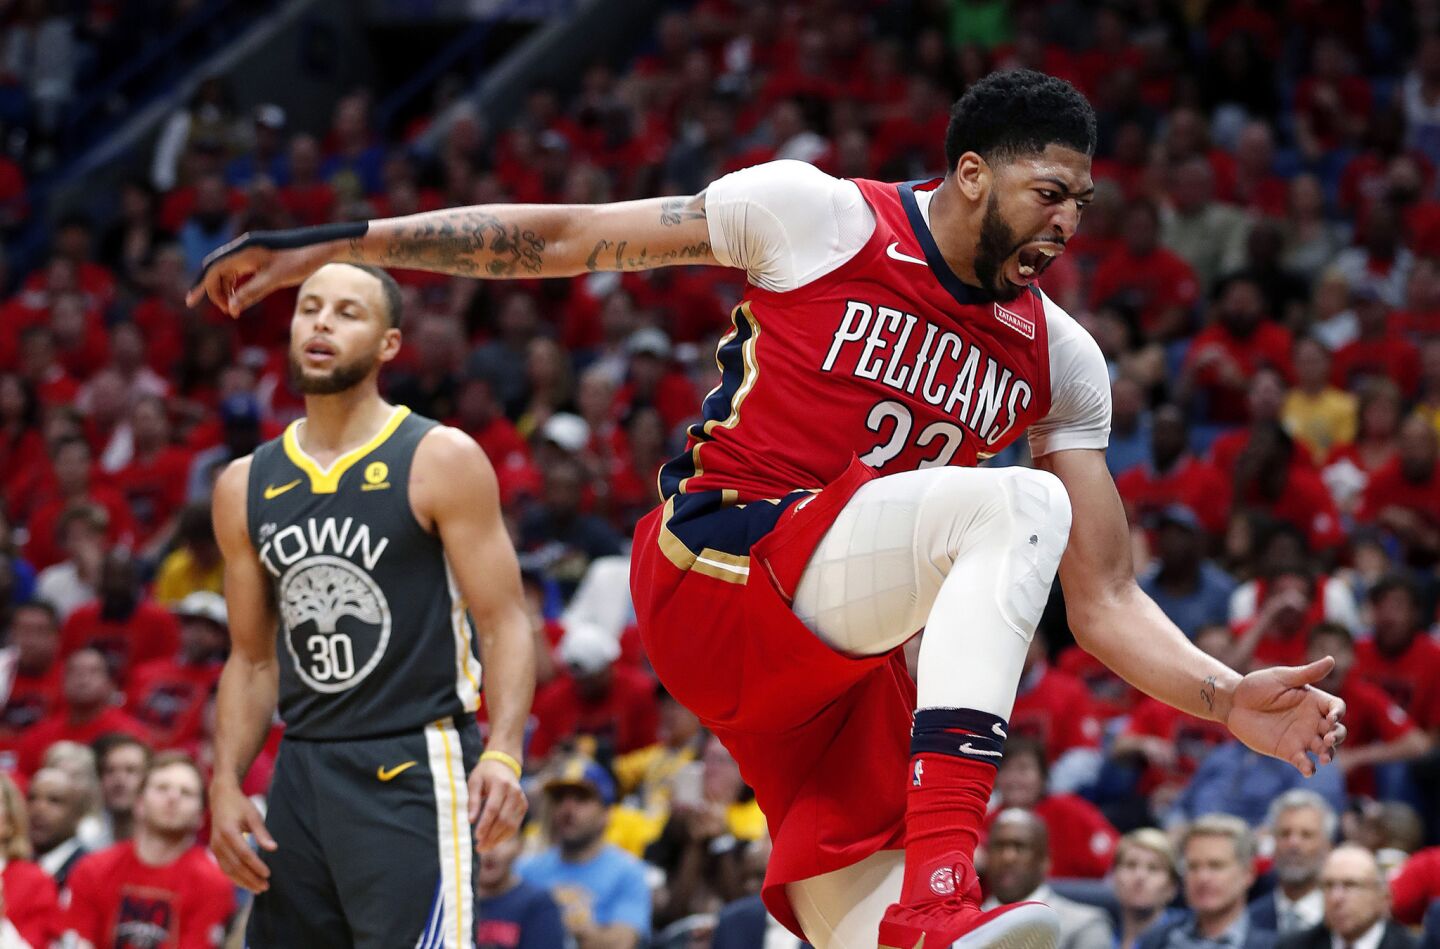 Pelicans forward Anthony Davis reacts after a slam dunk during the second half of Game 3 of a second-round NBA basketball playoff series against the Golden State Warriors on May 4, 2018.